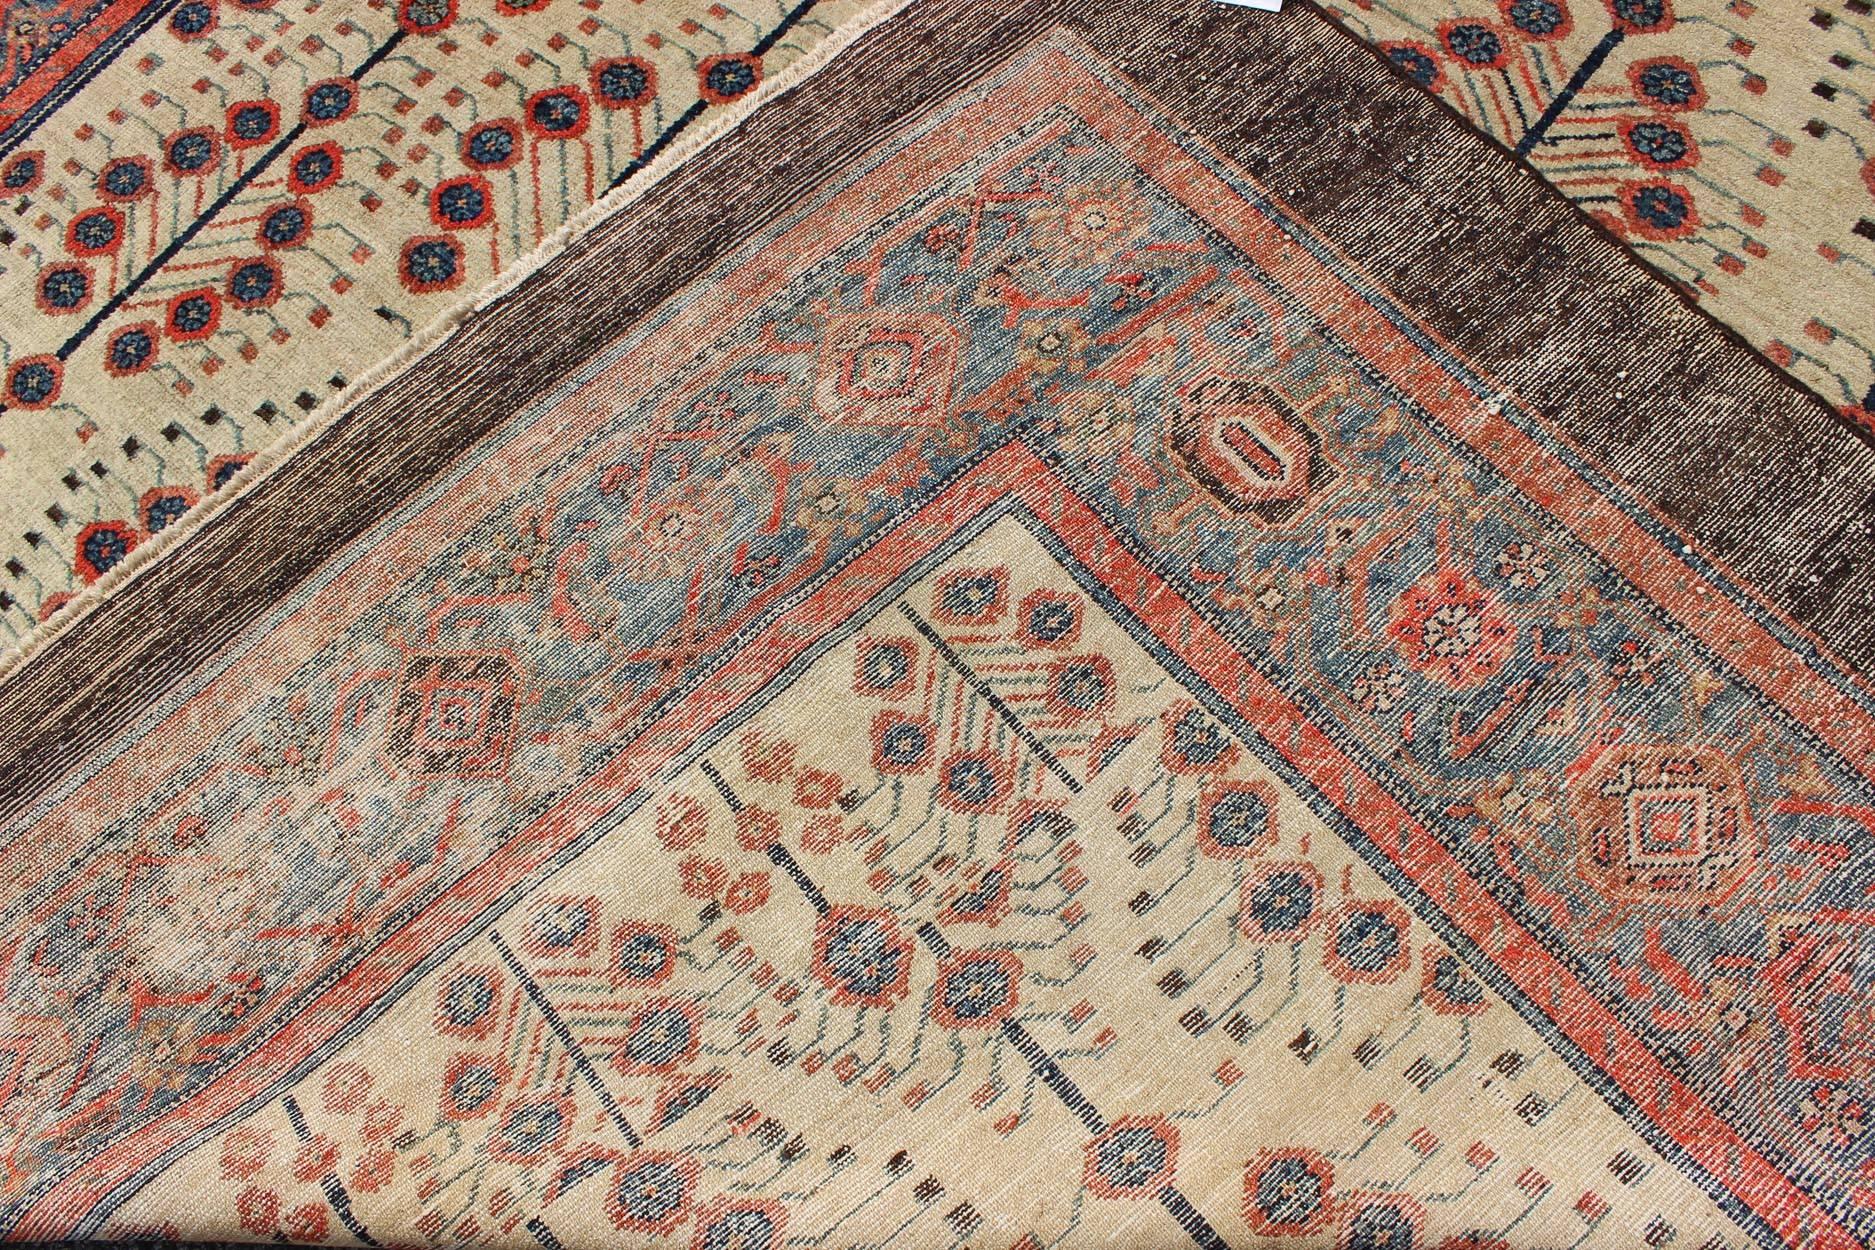 Wool Antique Persian Serab Rug with Tree Design in Cream, Red, Blue and Brown Colors For Sale